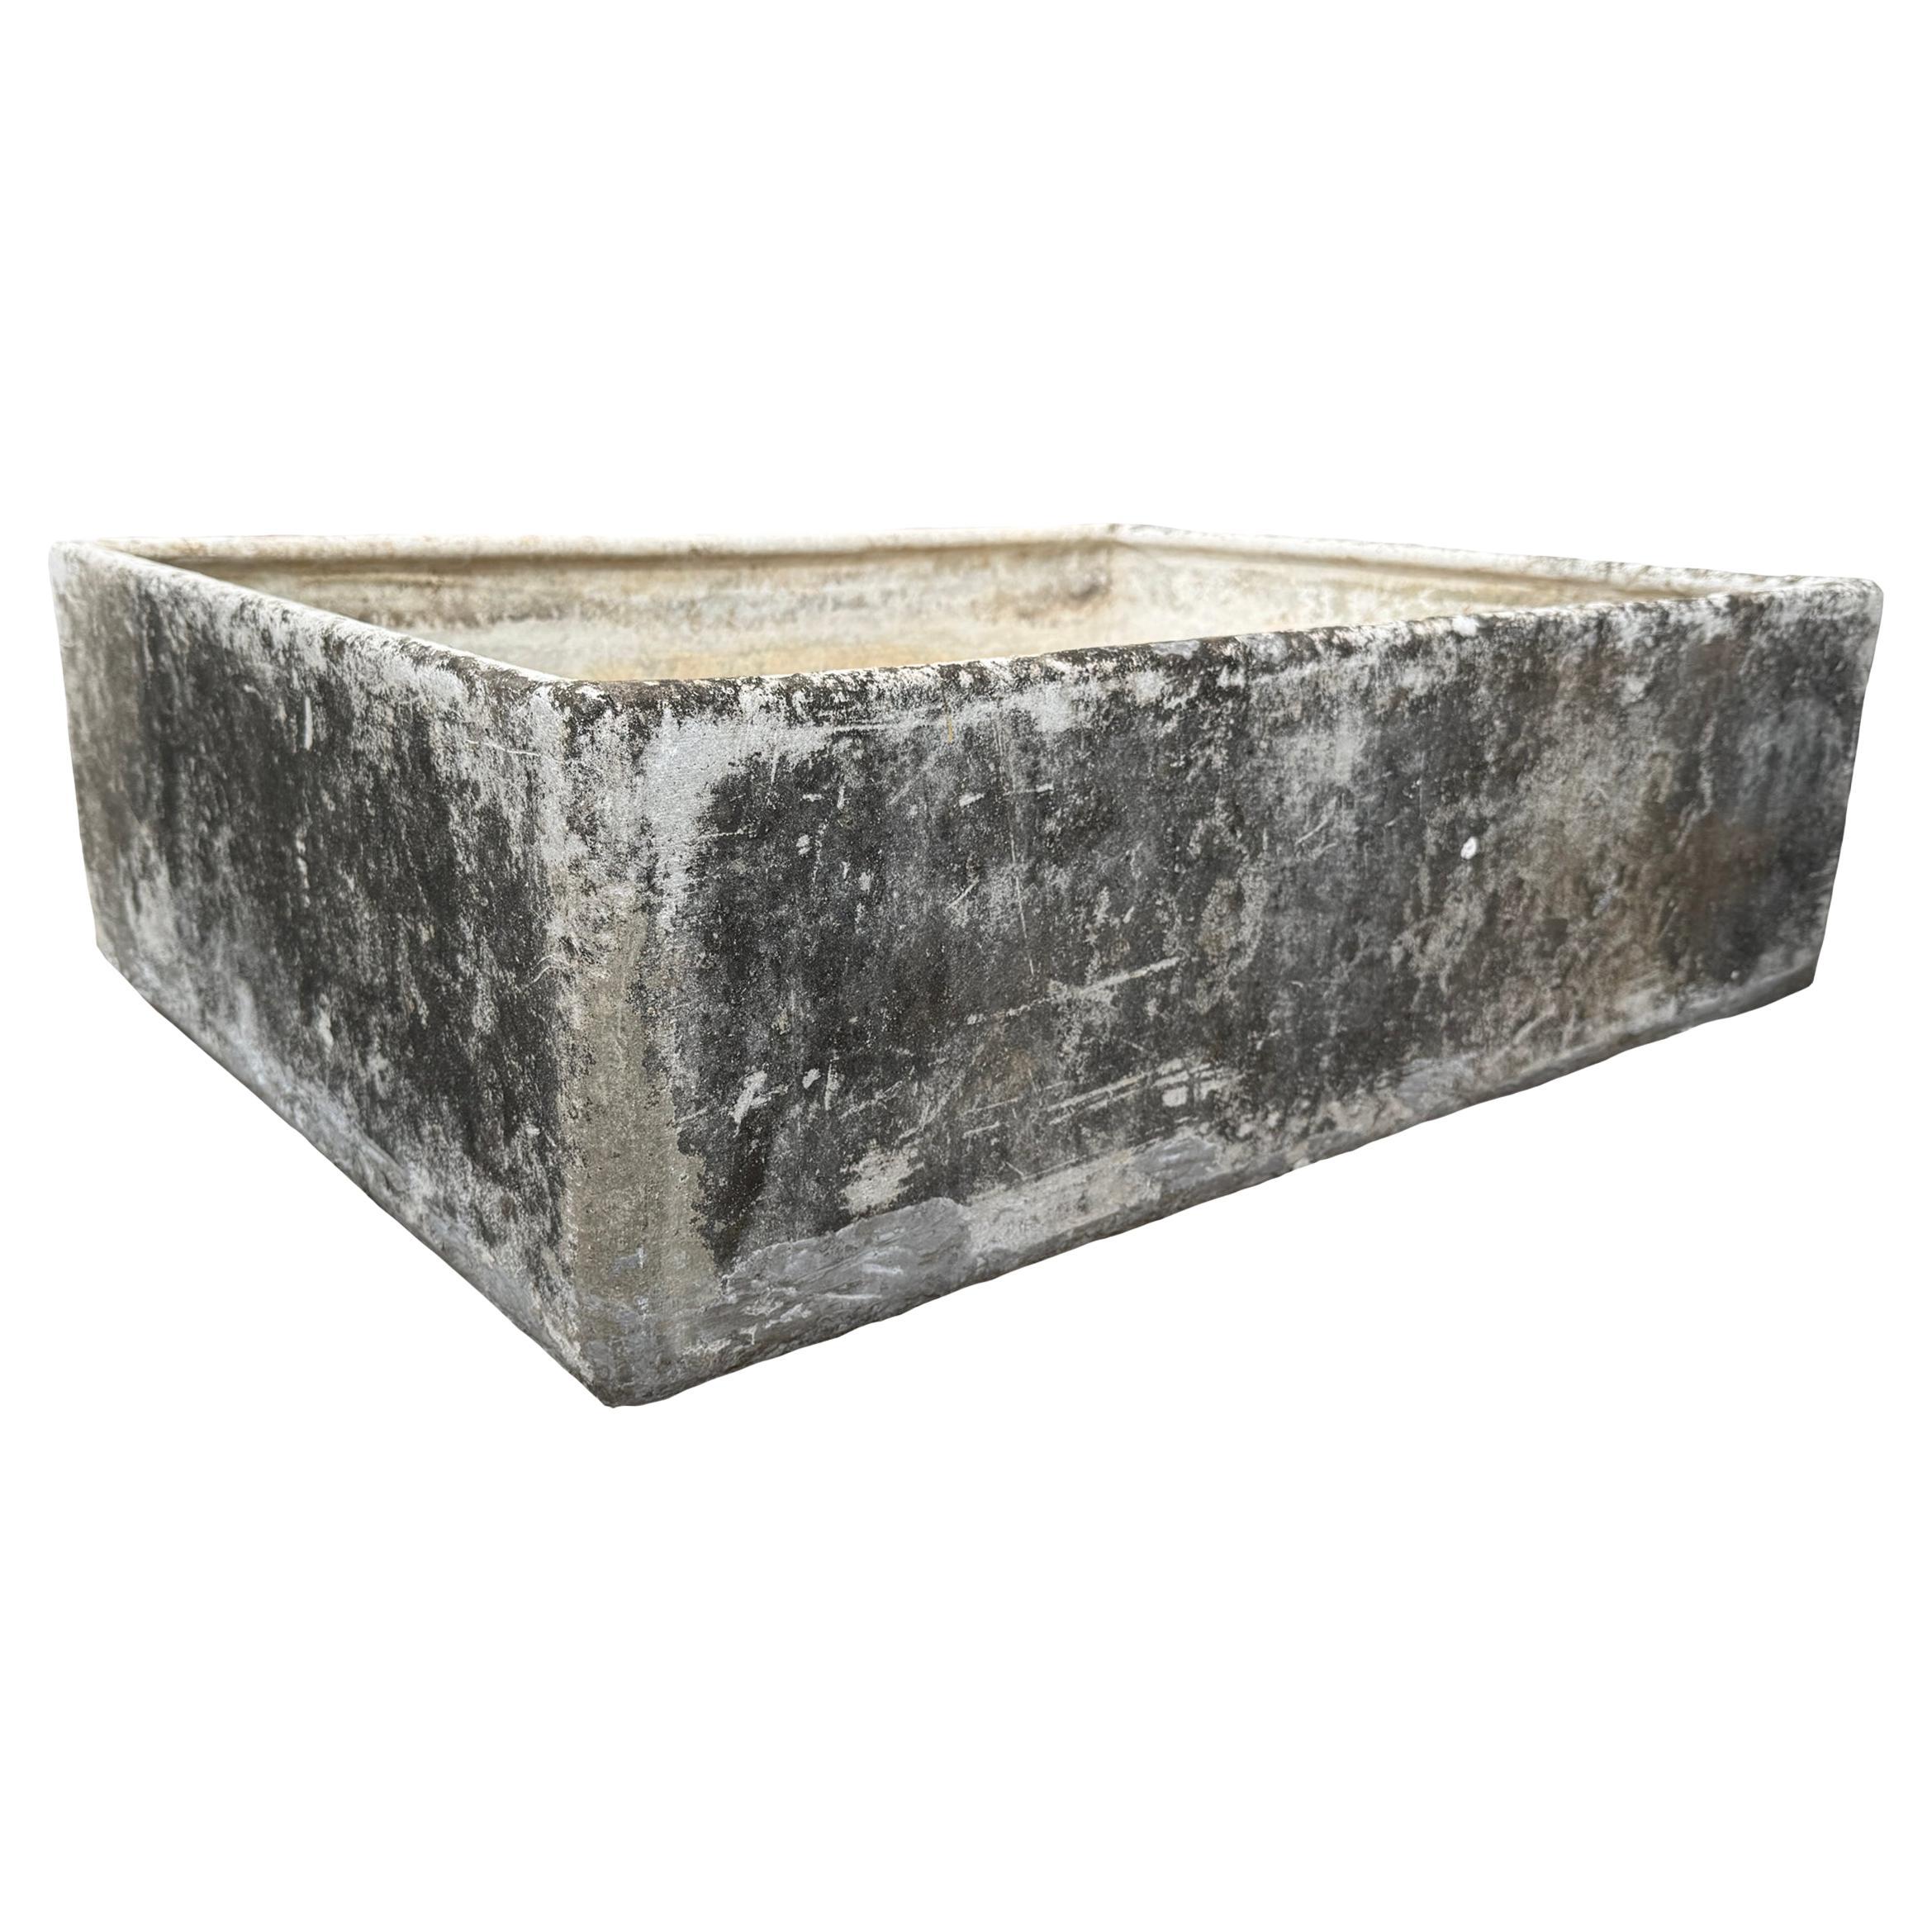 Midcentury Rare Square Planter by Swiss Architect Willy Guhl for Eternit, 1960s For Sale